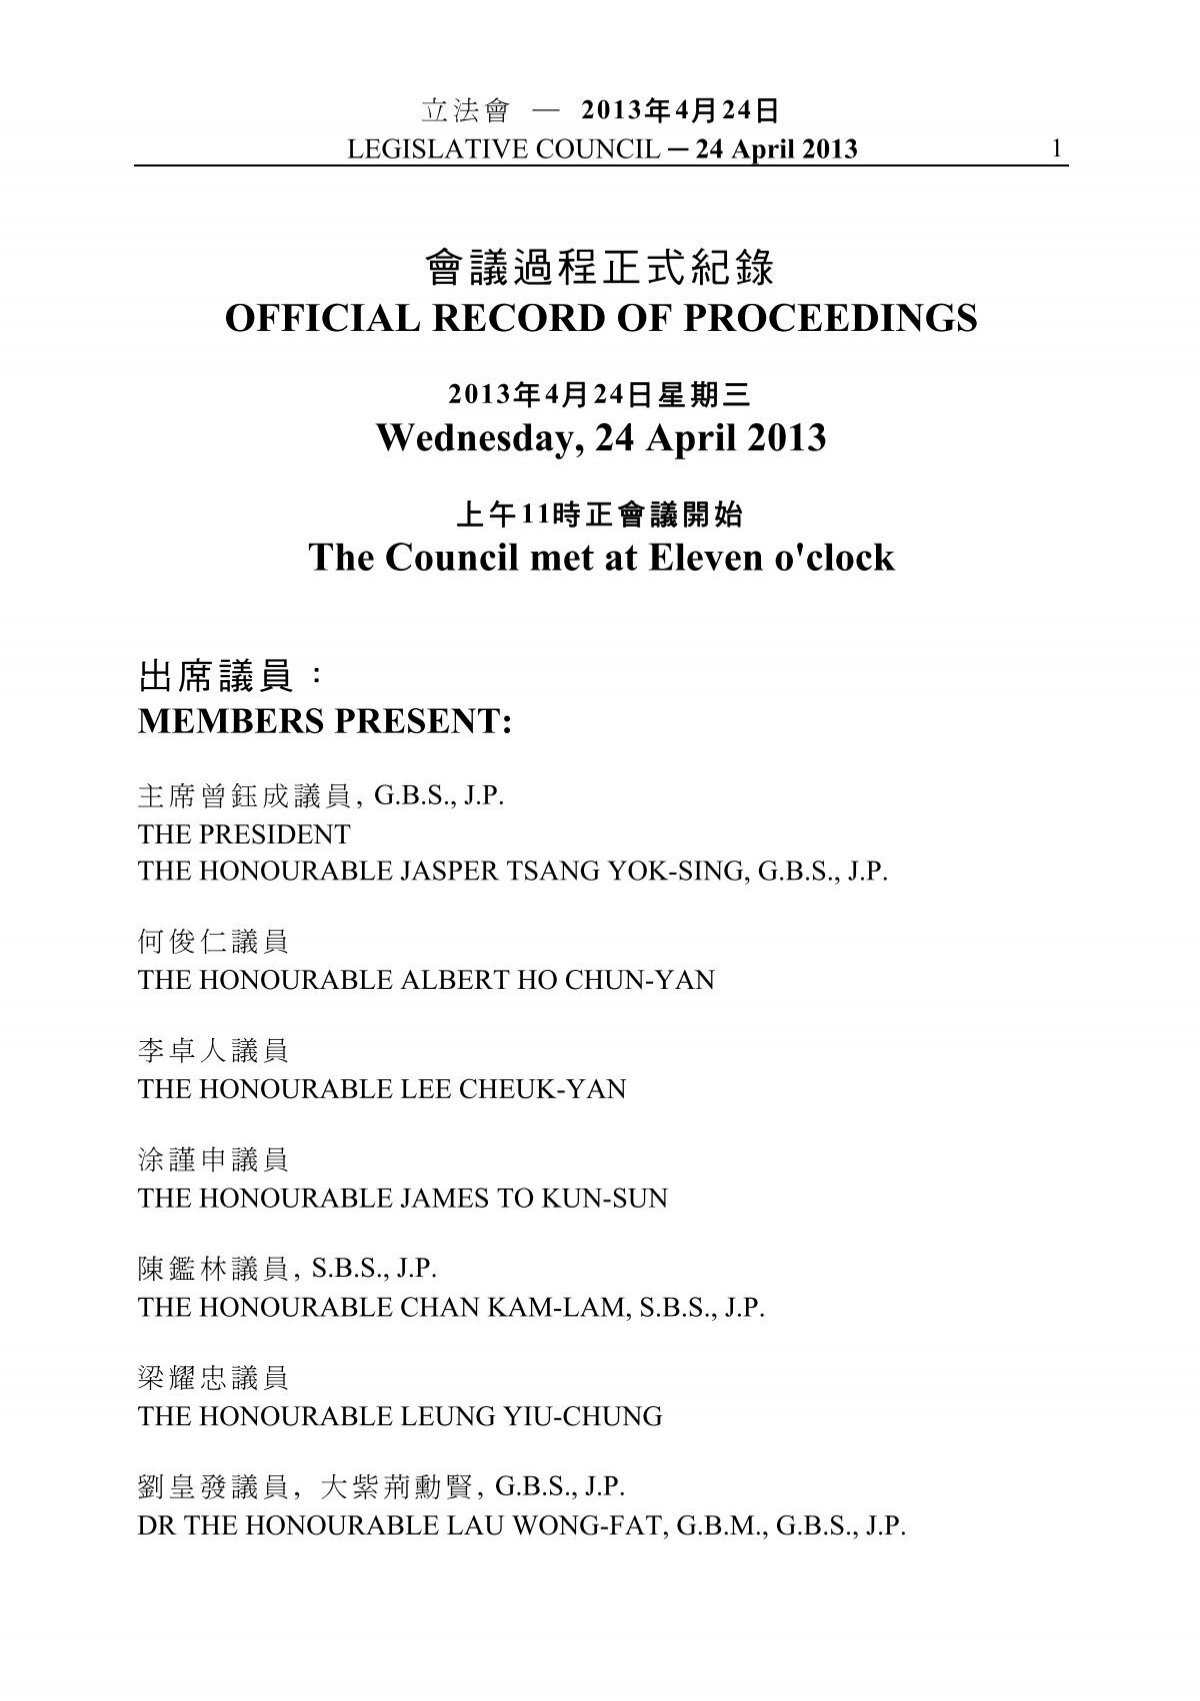 Official Record Of Proceedings